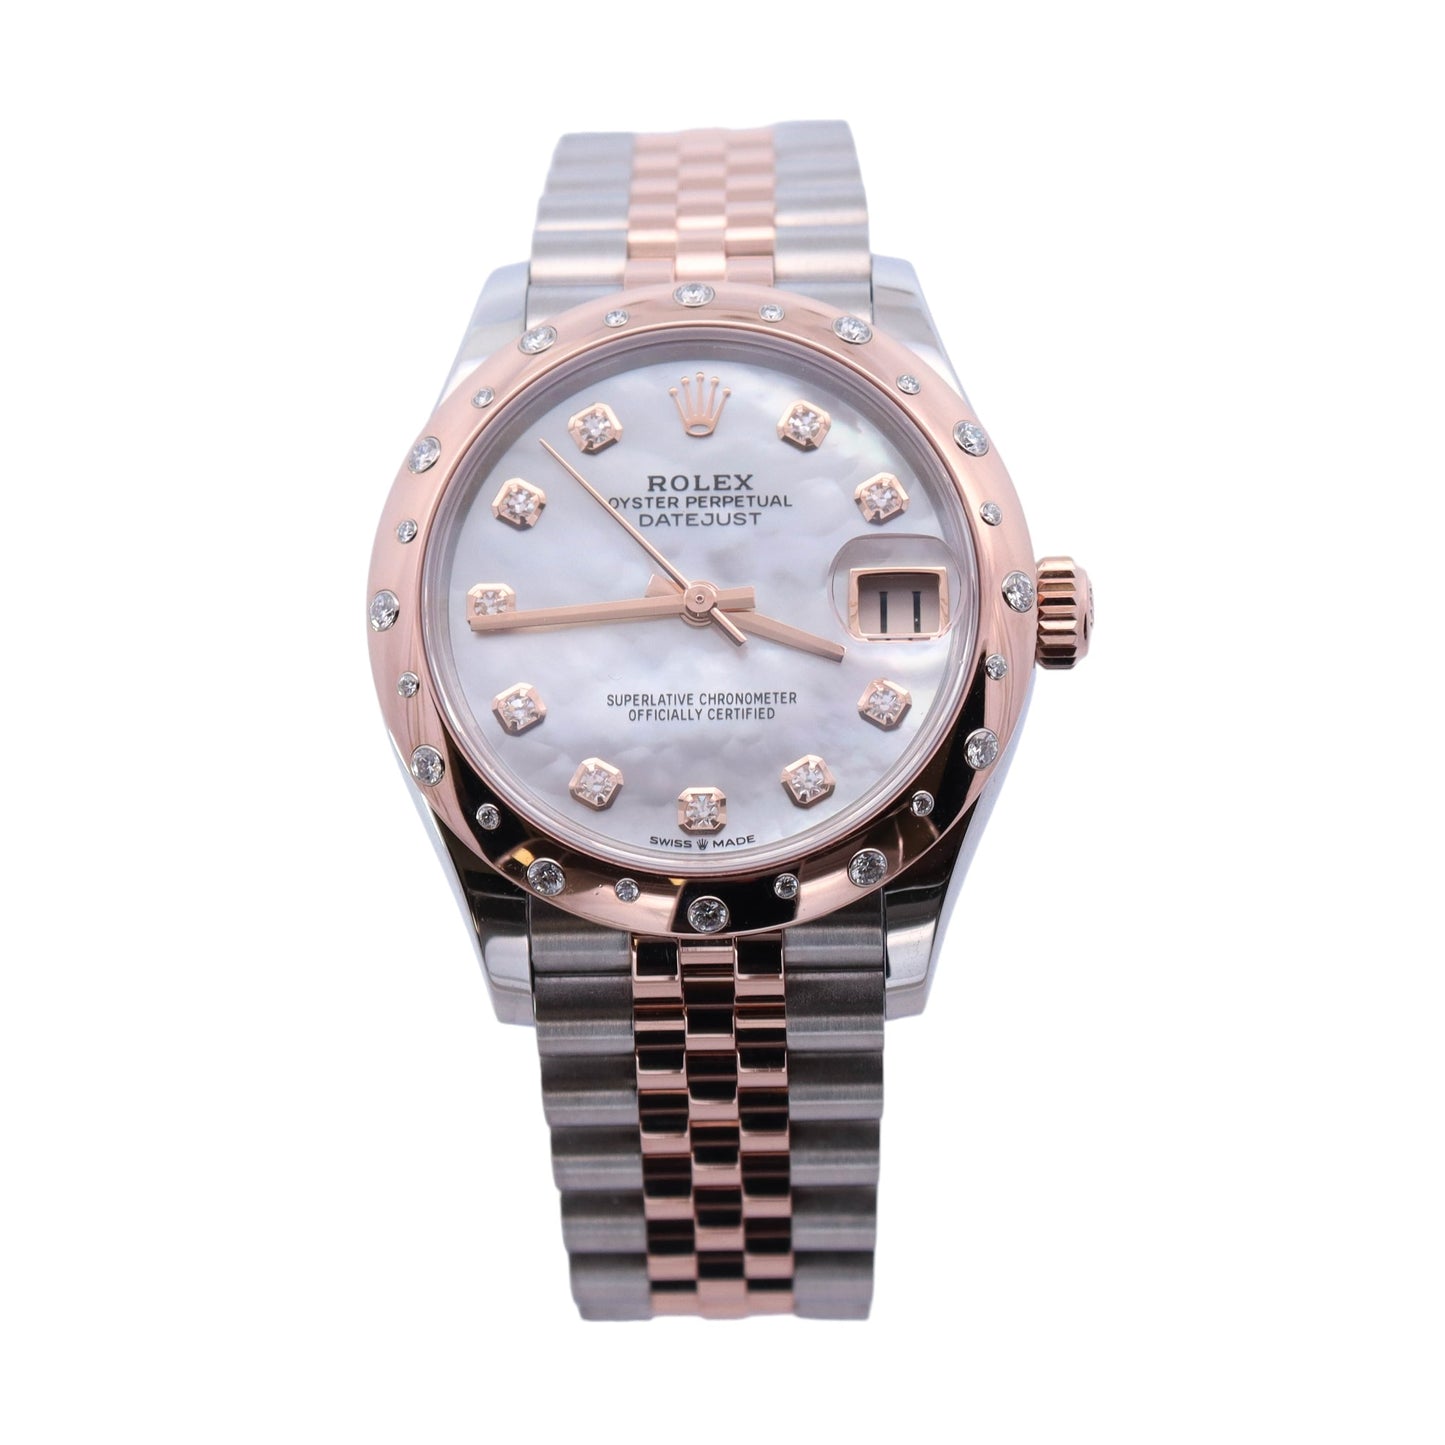 Rolex Datejust 31mm Stainless Steel & Rose Gold MOP Diamond Dial Watch Reference# 278341RBR - Happy Jewelers Fine Jewelry Lifetime Warranty